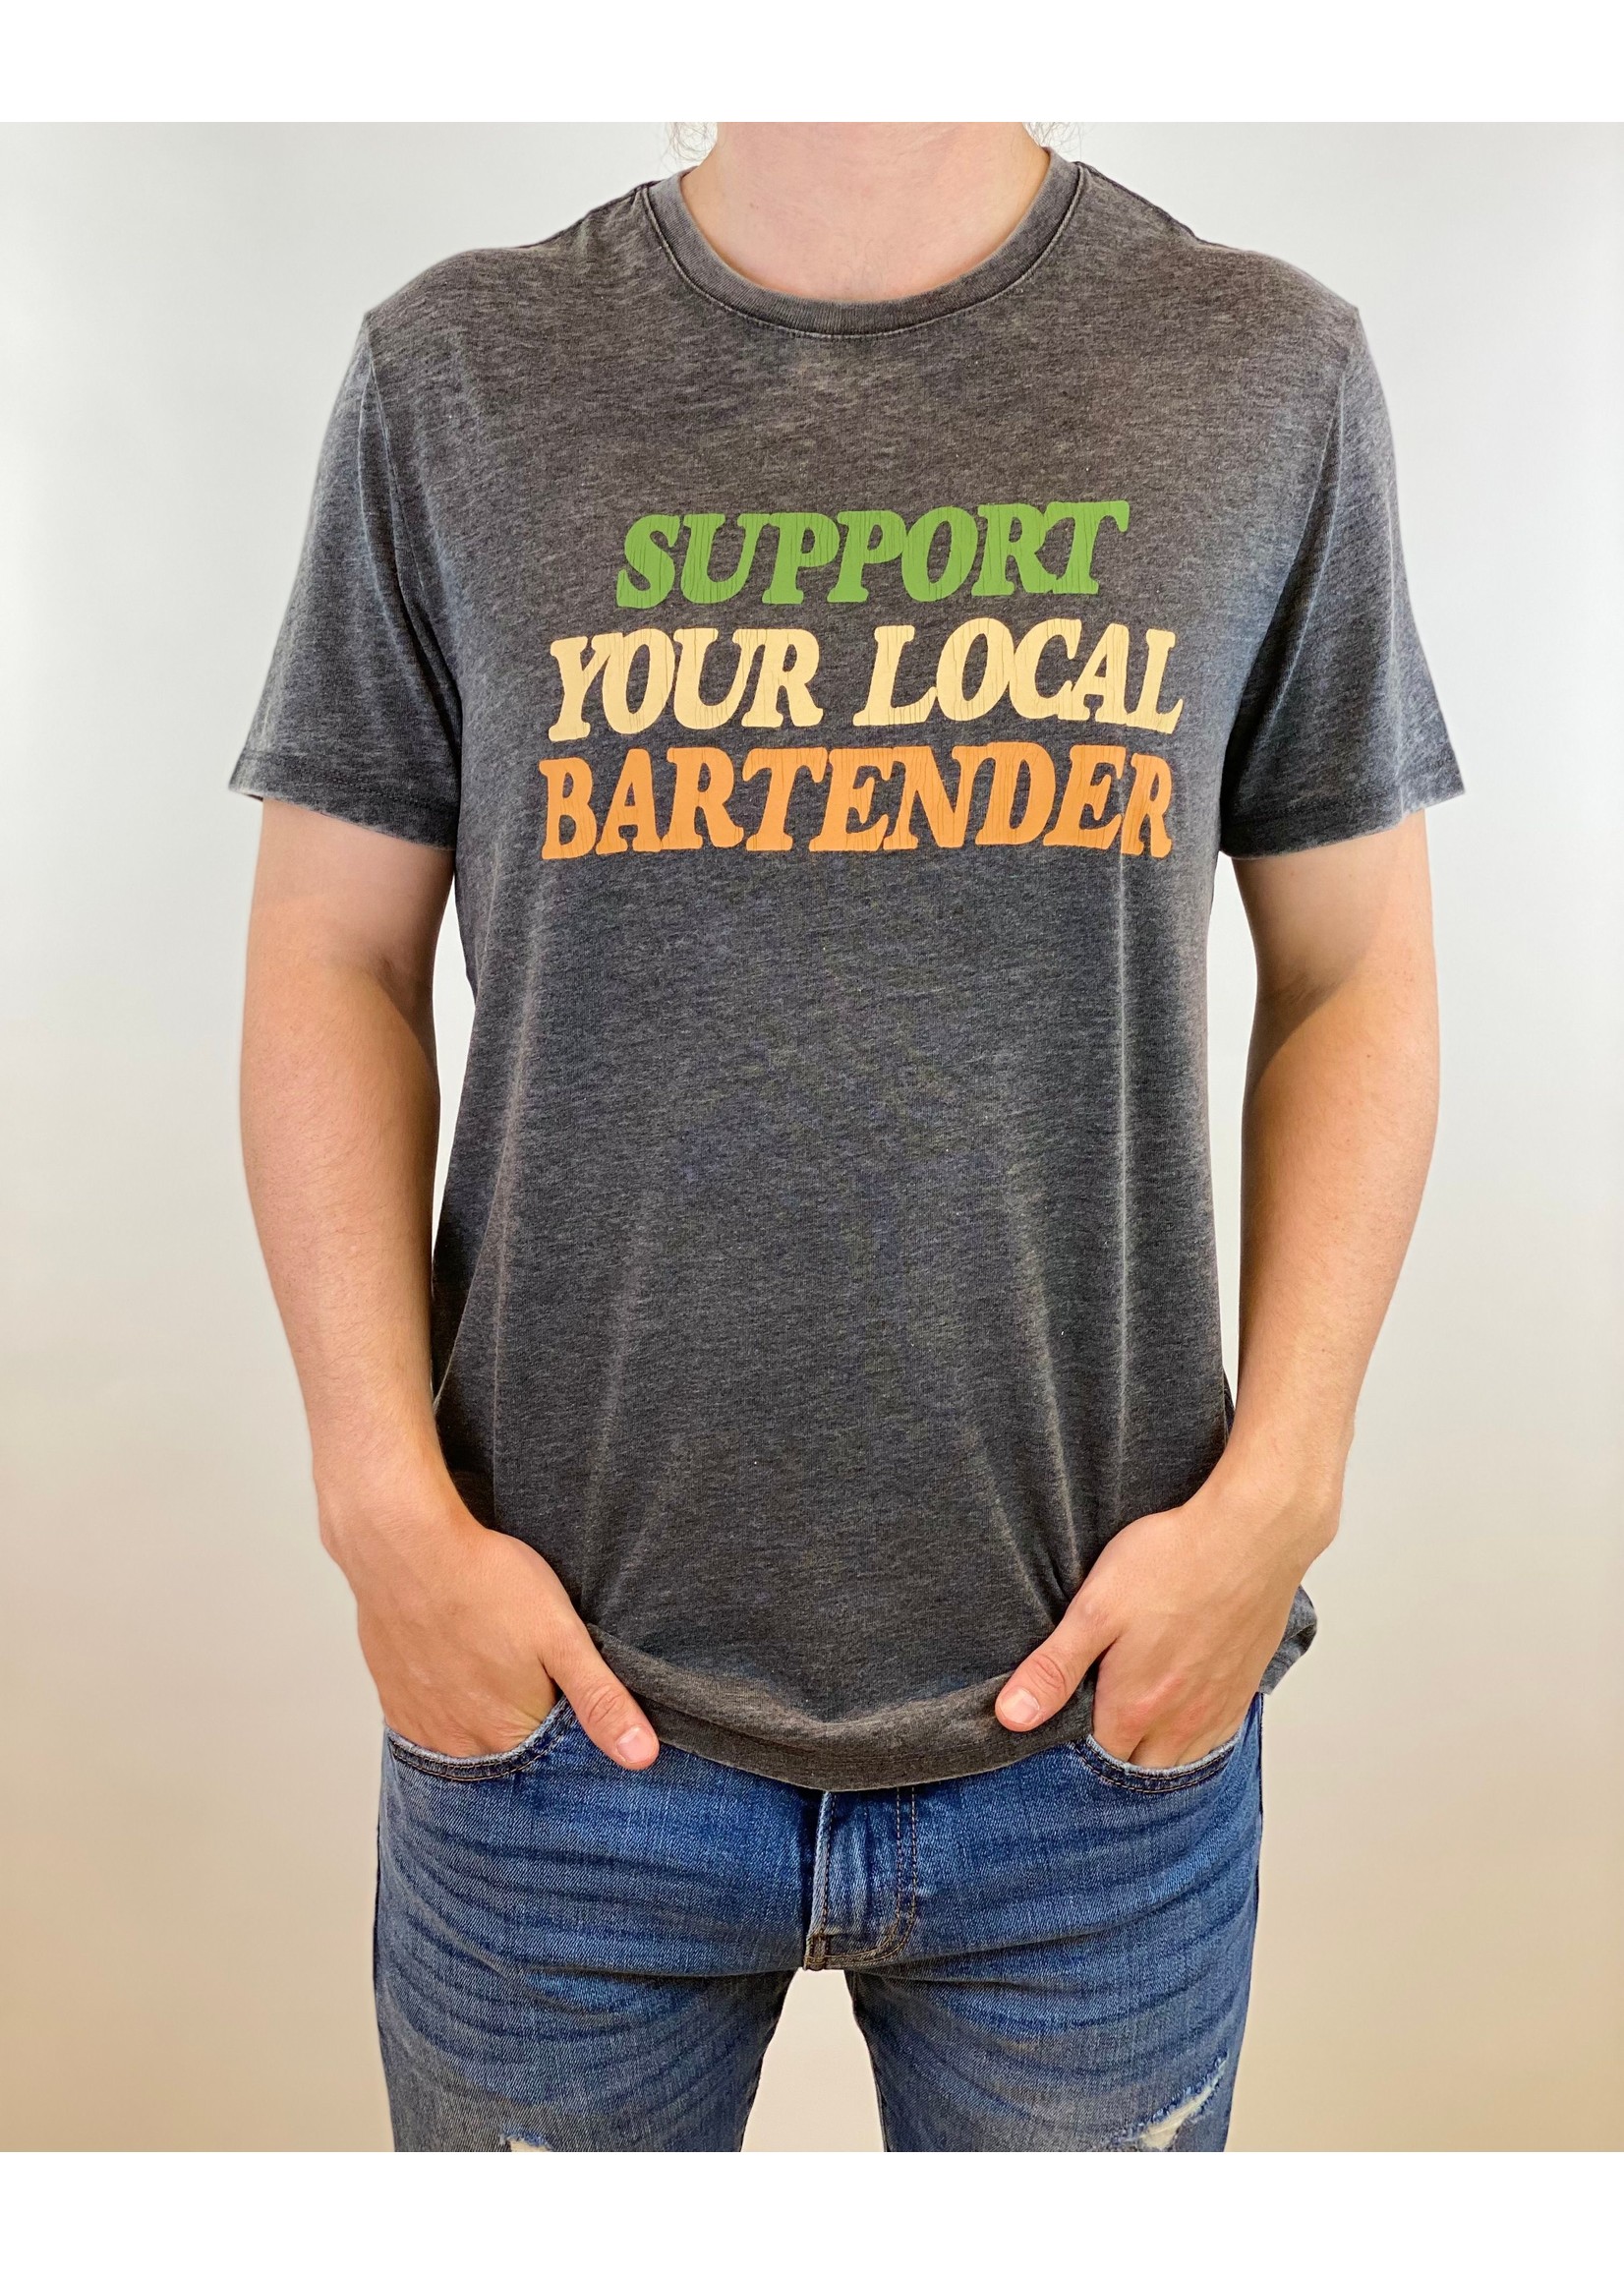 Support Your Local Bartender Tee